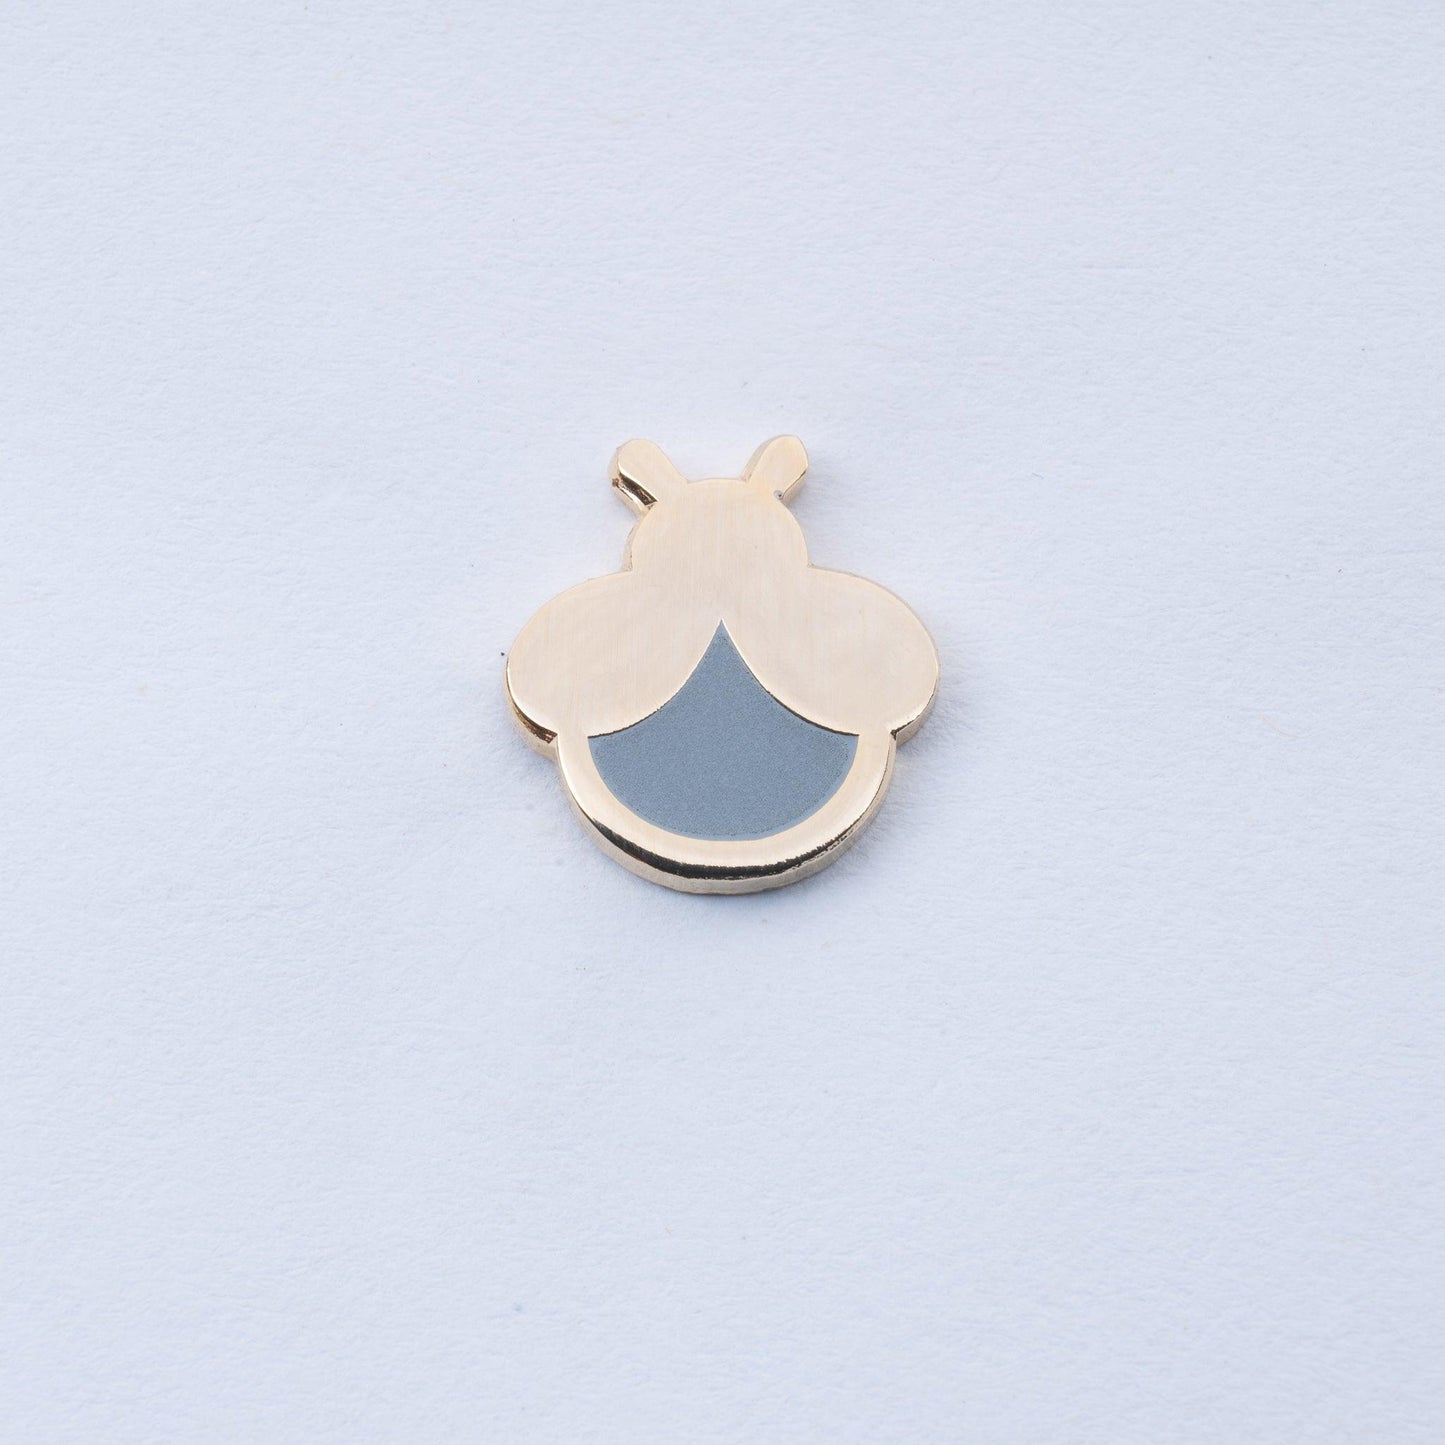 gold plated mini firefly enamel pin with grey body that glows in the dark